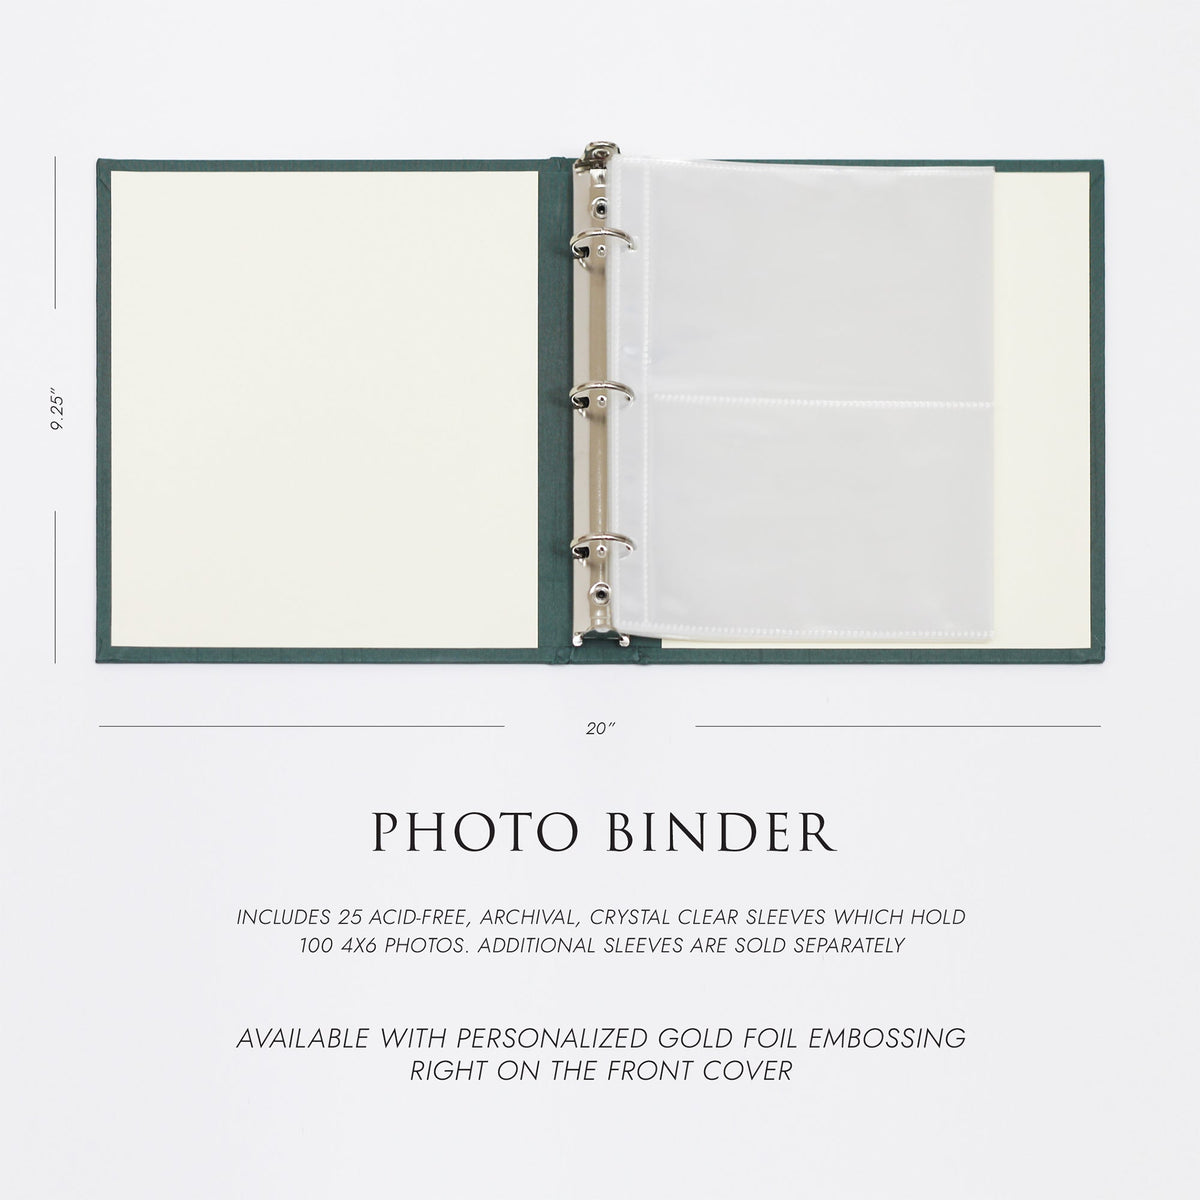 Medium Photo Binder For 4x6 Photos | Cover: Lavender Cotton | Available Personalized